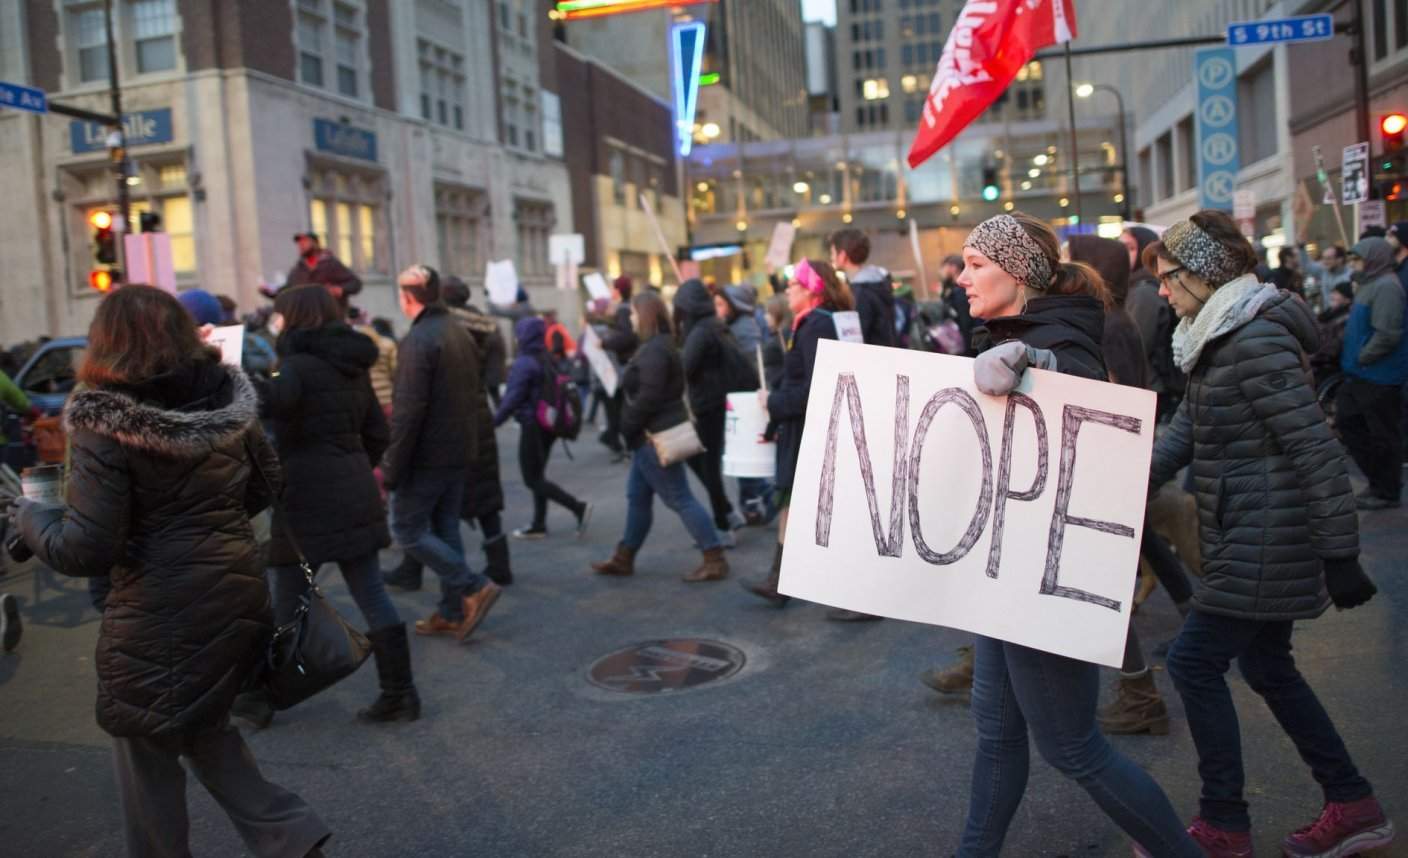 Protesters in Minneapolis holding a sign saying "Nope"